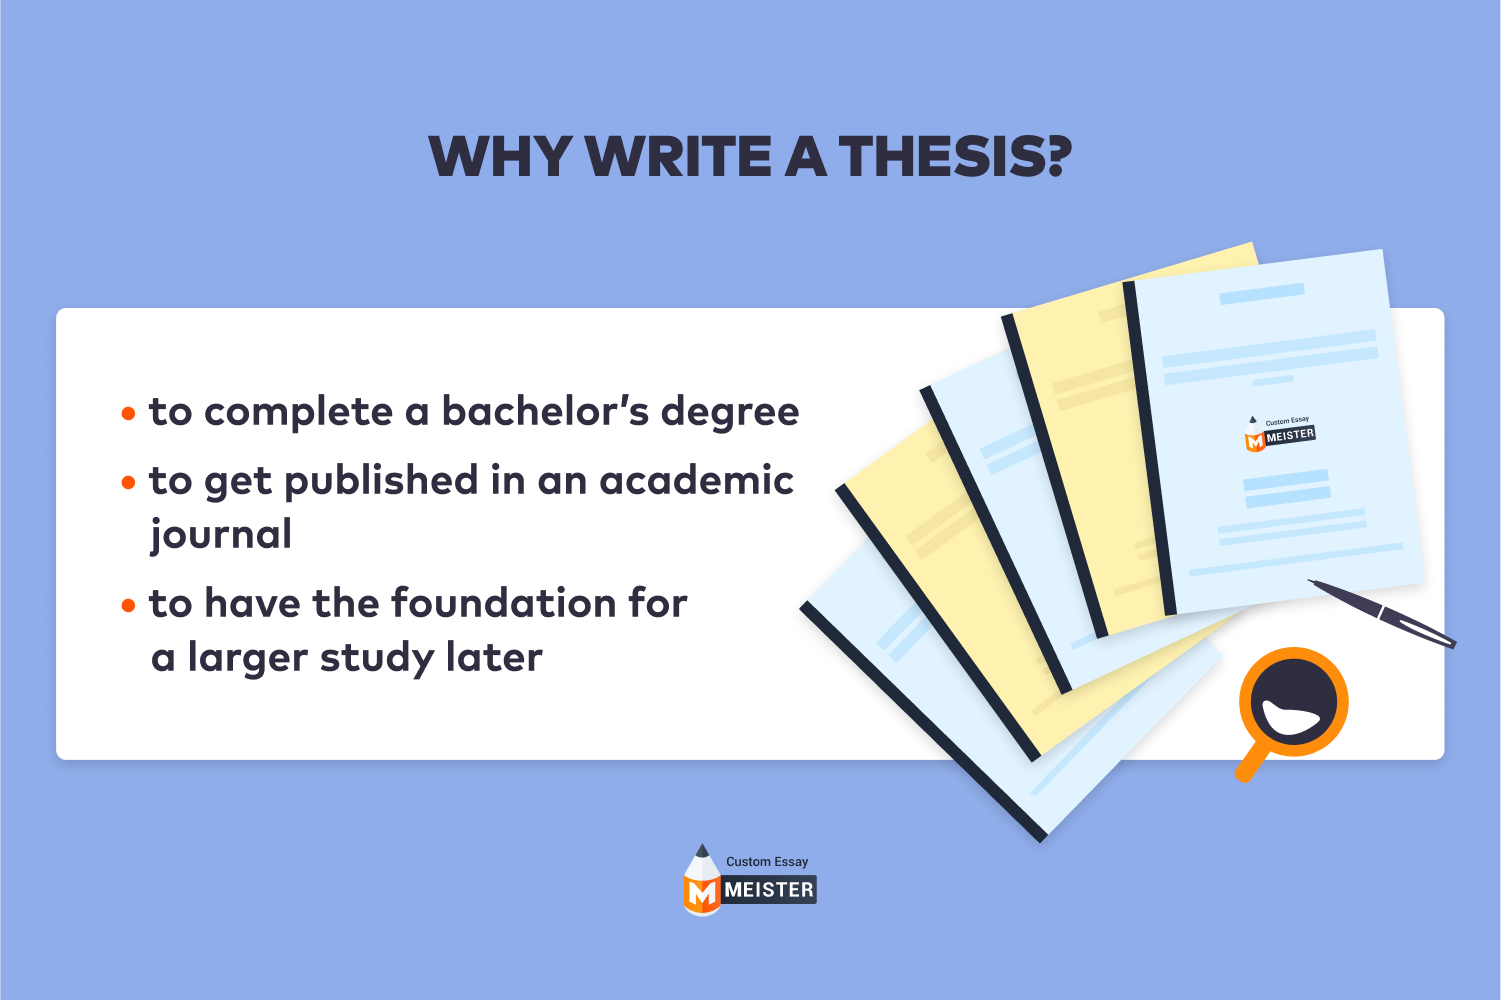 can you submit a thesis without a degree